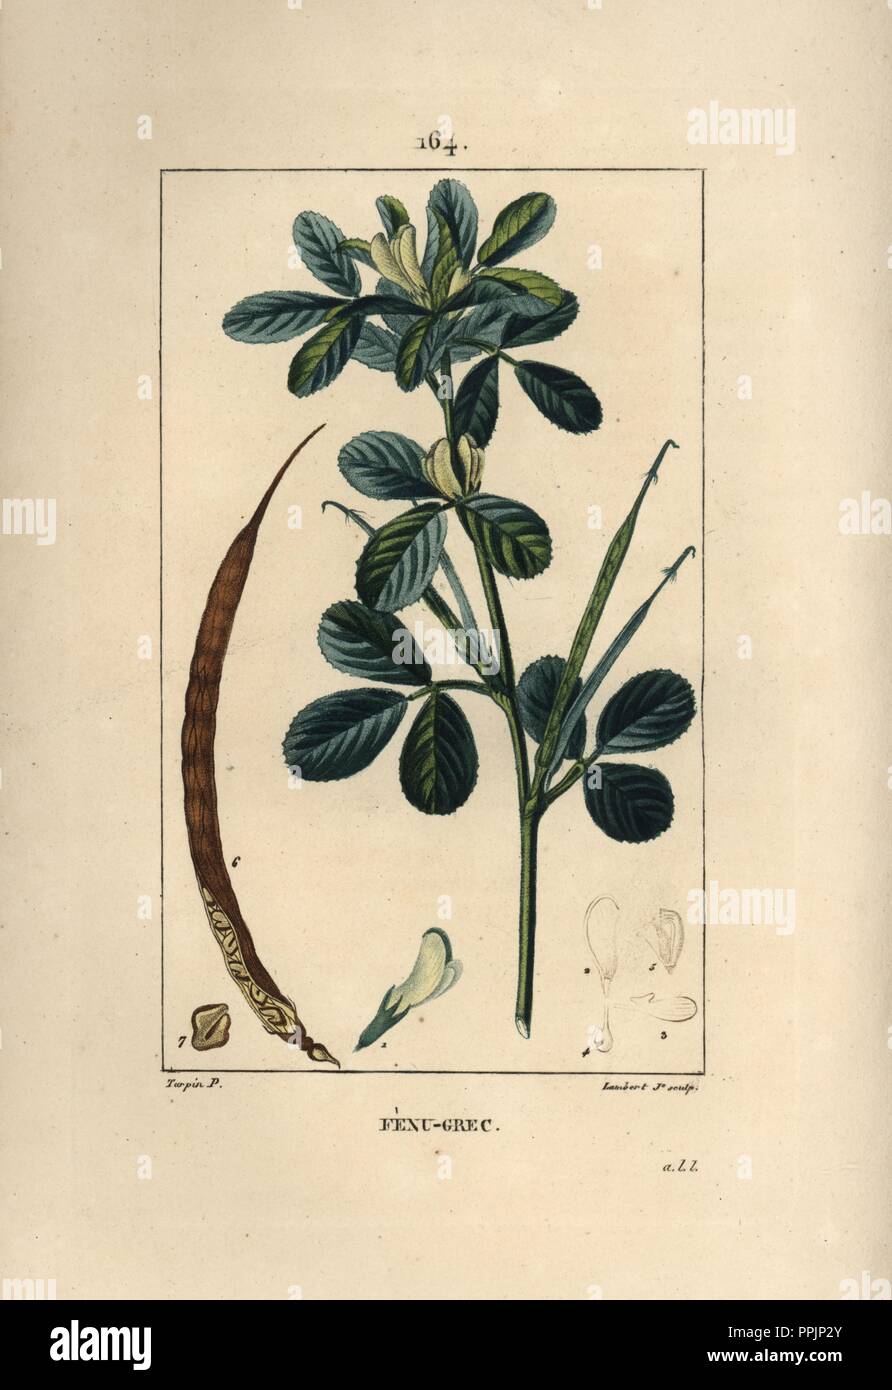 Fenugreek, Trigonella foenum-graecum, showing leaves, seedpod and seed. Handcoloured stipple copperplate engraving by Lambert Junior from a drawing by Pierre Jean-Francois Turpin from Chaumeton, Poiret et Chamberet's 'La Flore Medicale,' Paris, Panckoucke, 1830. Turpin (17751840) was one of the three giants of French botanical art of the era alongside Pierre Joseph Redoute and Pancrace Bessa. Stock Photo